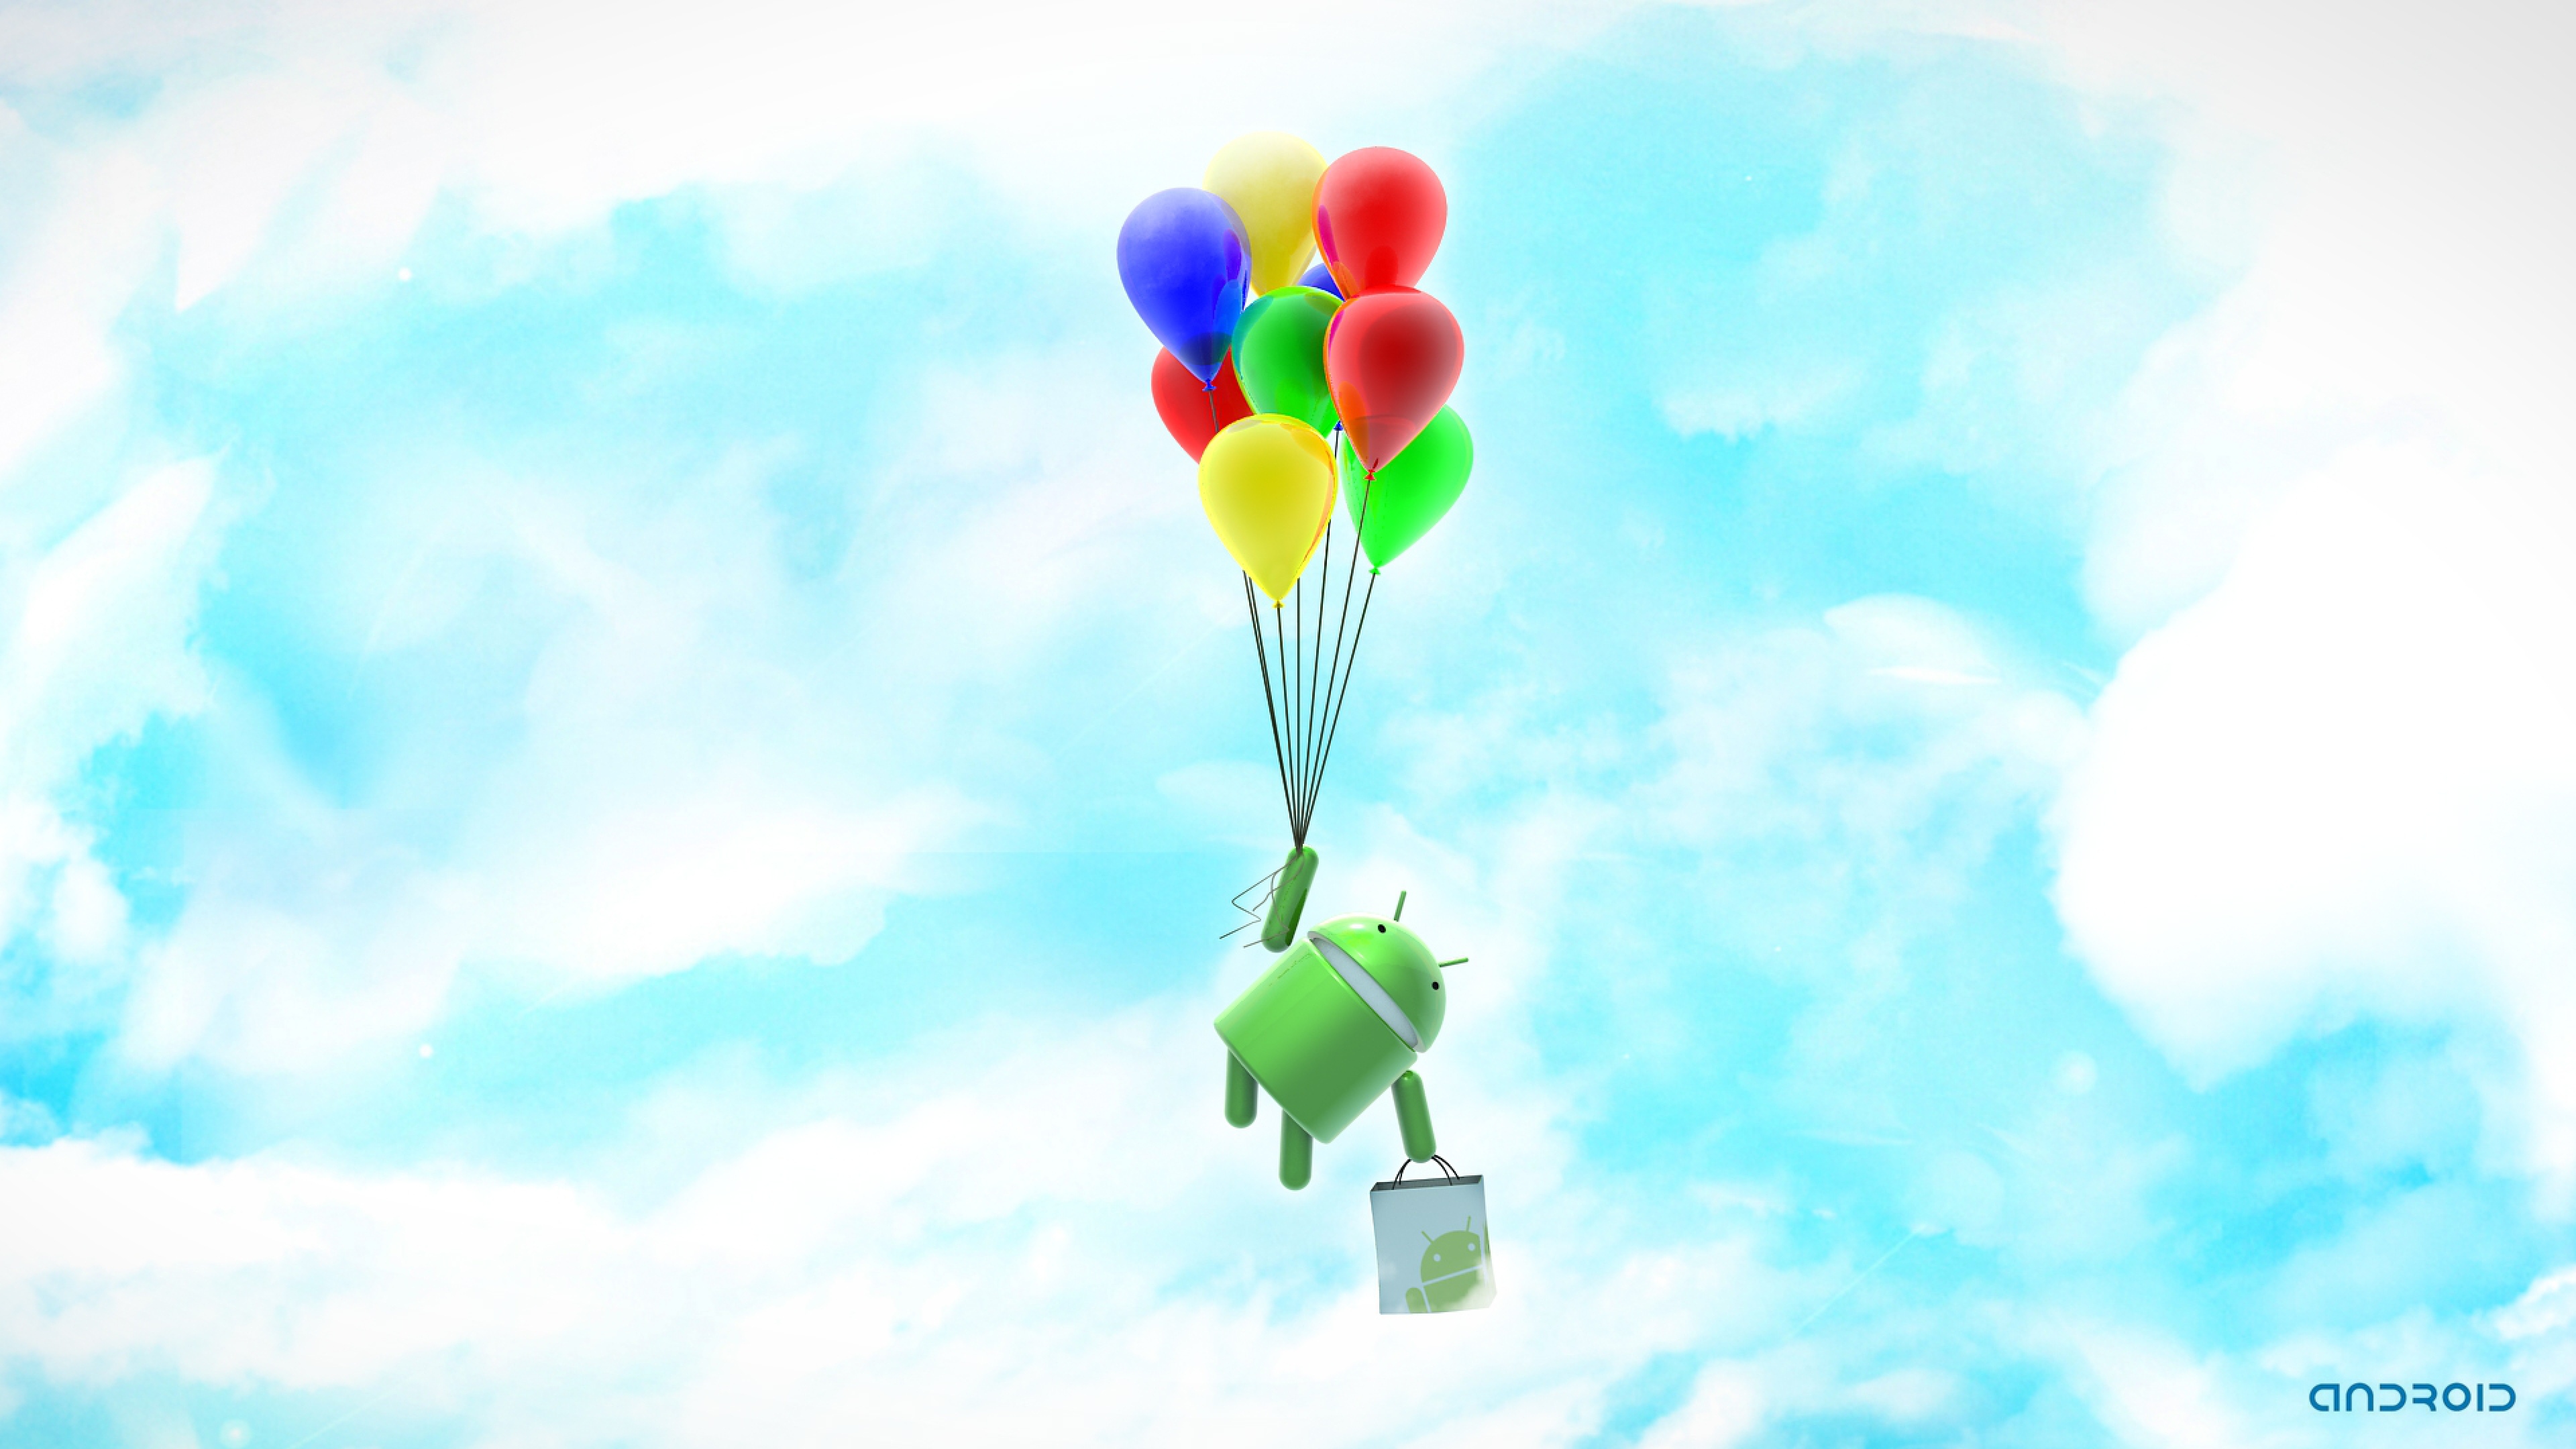 Android System Robot Clouds Sky Balloons 4k Ultra HD